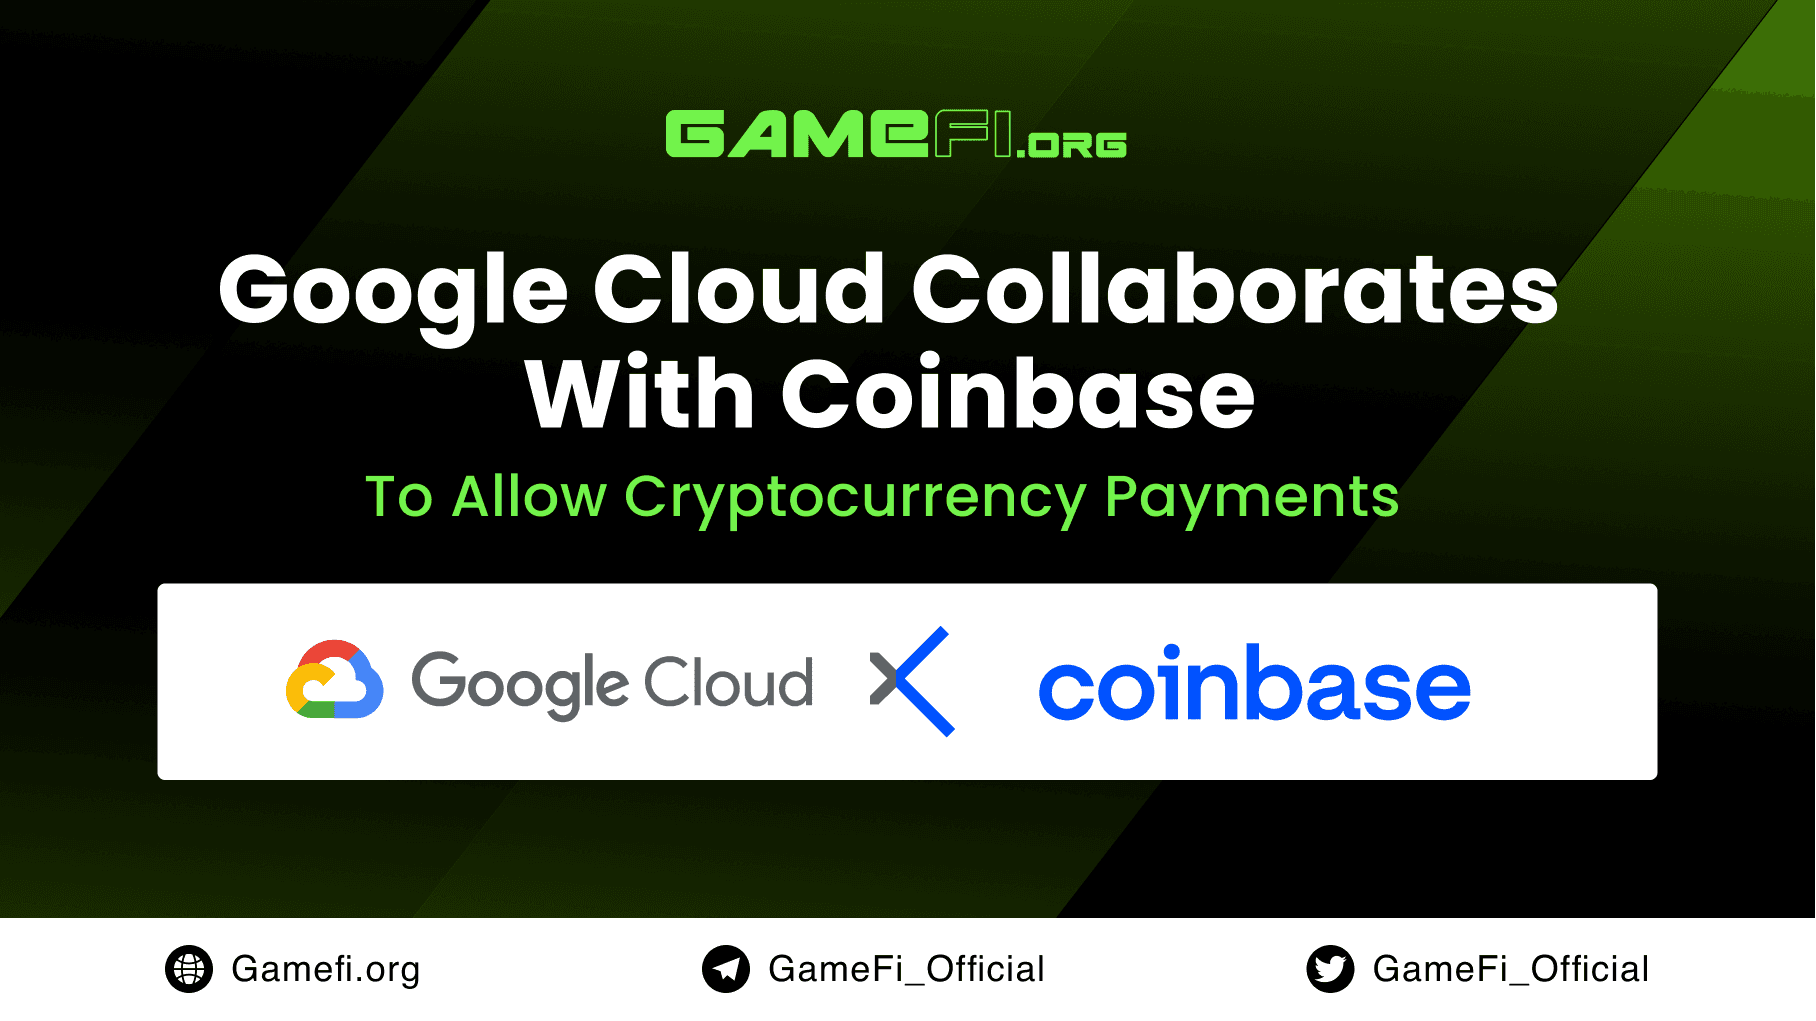 Google Cloud Collaborates with the Coinbase Exchange to Allow Cryptocurrency Payments